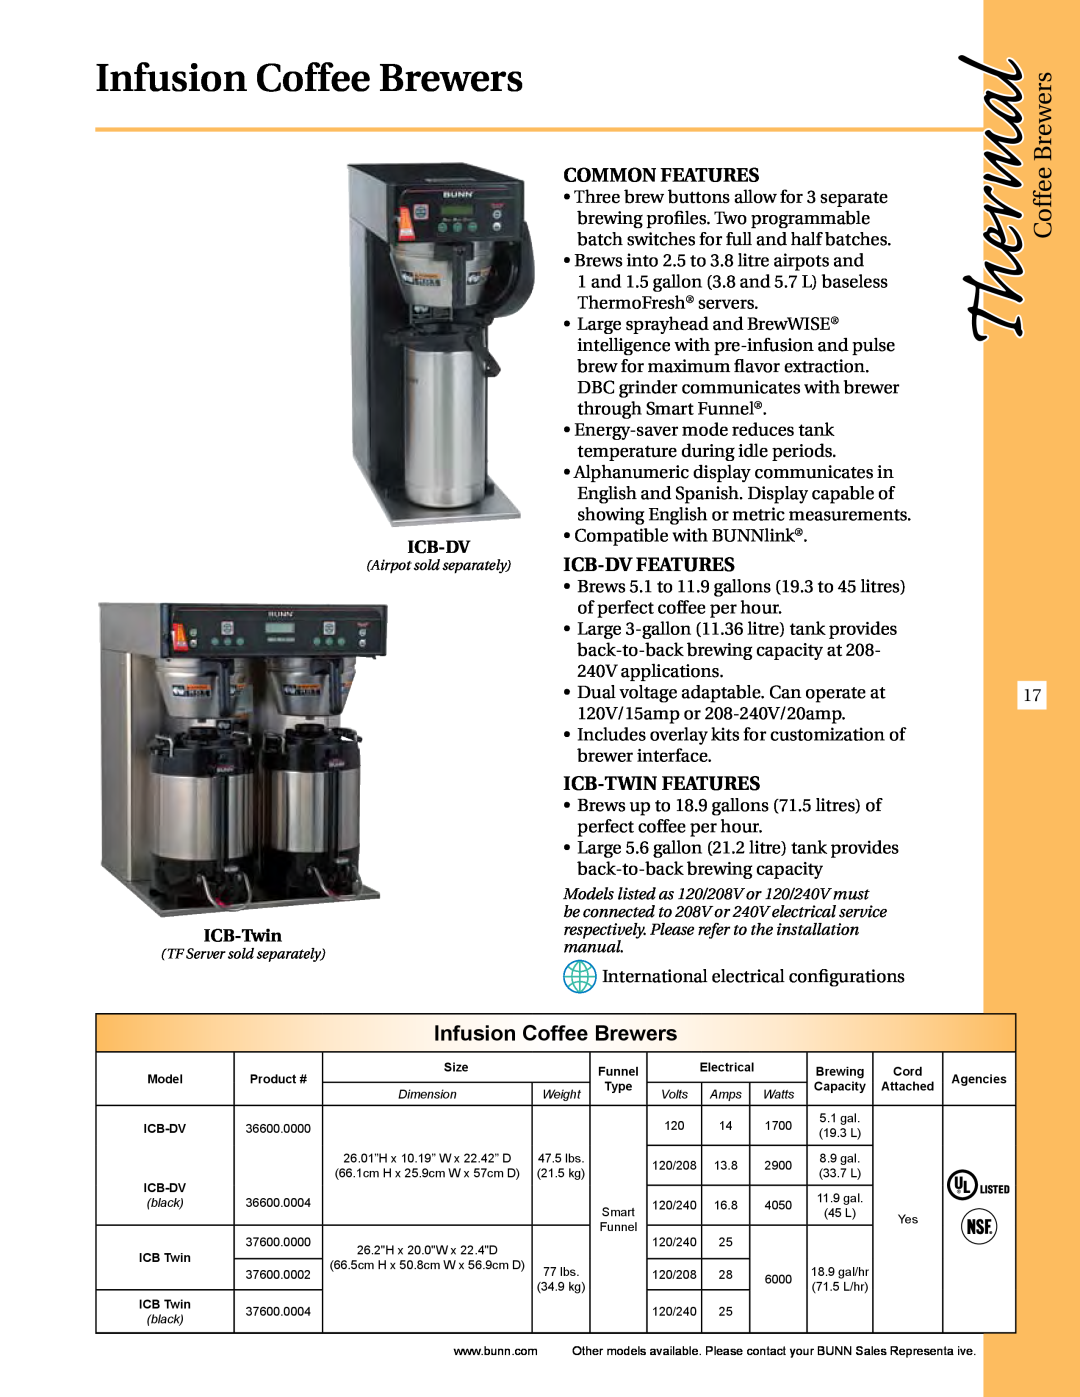 Thermal Comfort ICB-DV manual Infusion Coffee Brewers, Thermal, Common FEATURES, Icb-Dv Features, Icb-Twin Features 